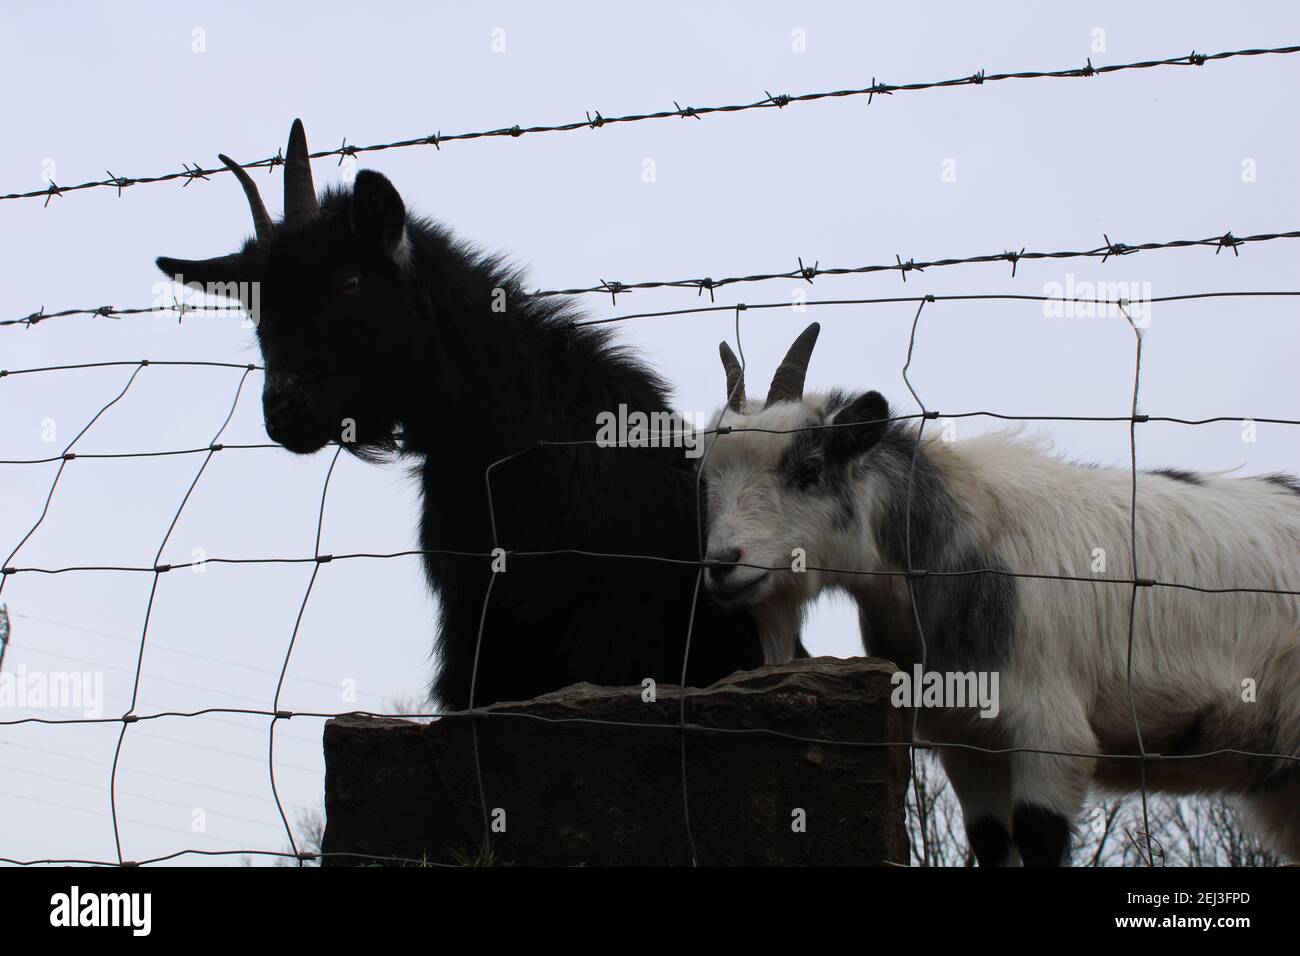 Two goats one poking its heads over the wire mesh fencing Stock Photo